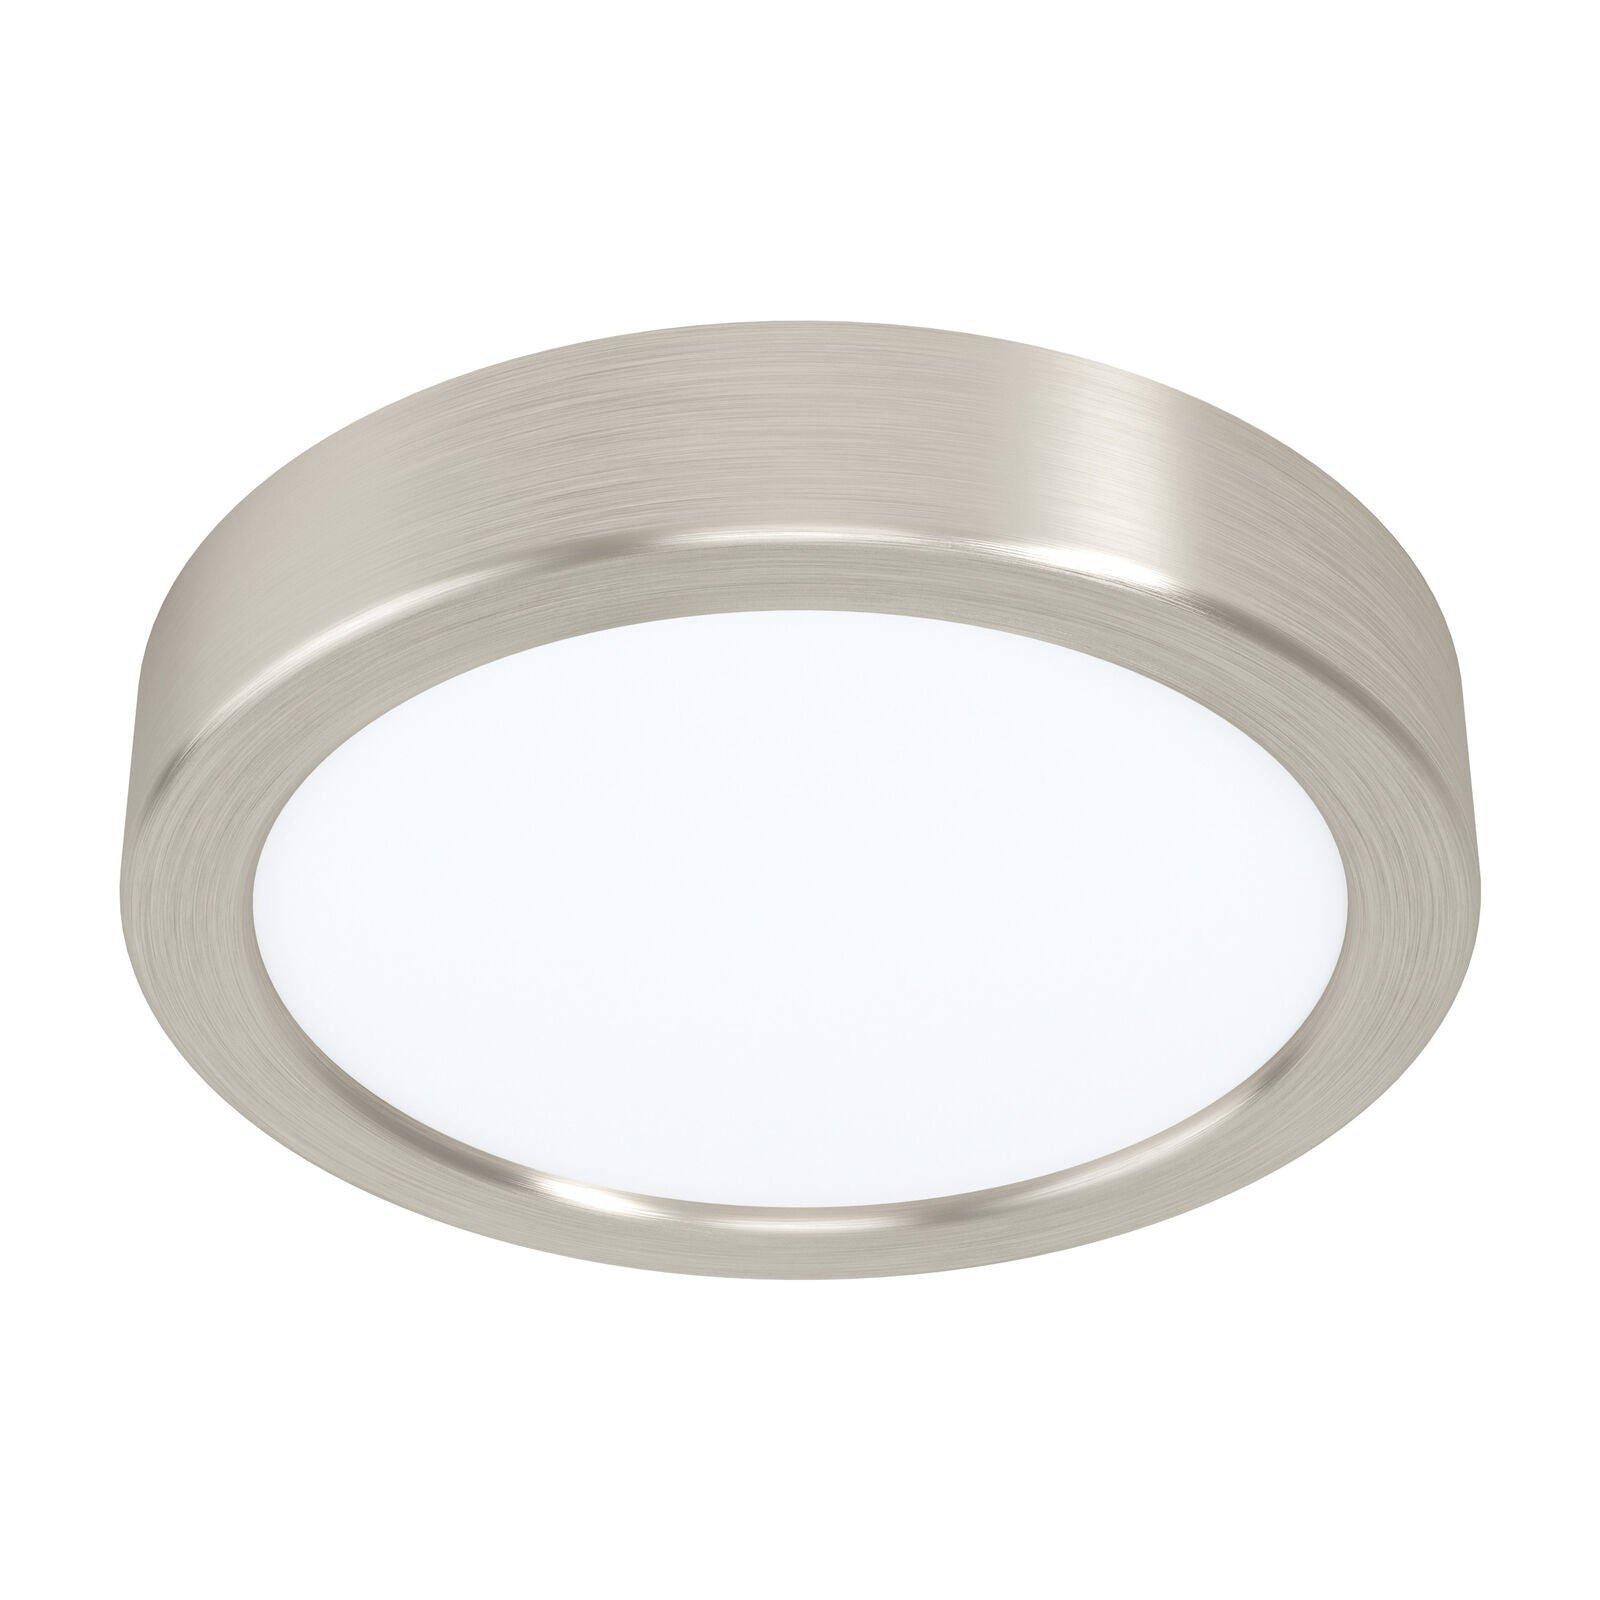 Wall / Ceiling Light Satin Nickel 160mm Round Surface Mounted 10.5W LED 4000K